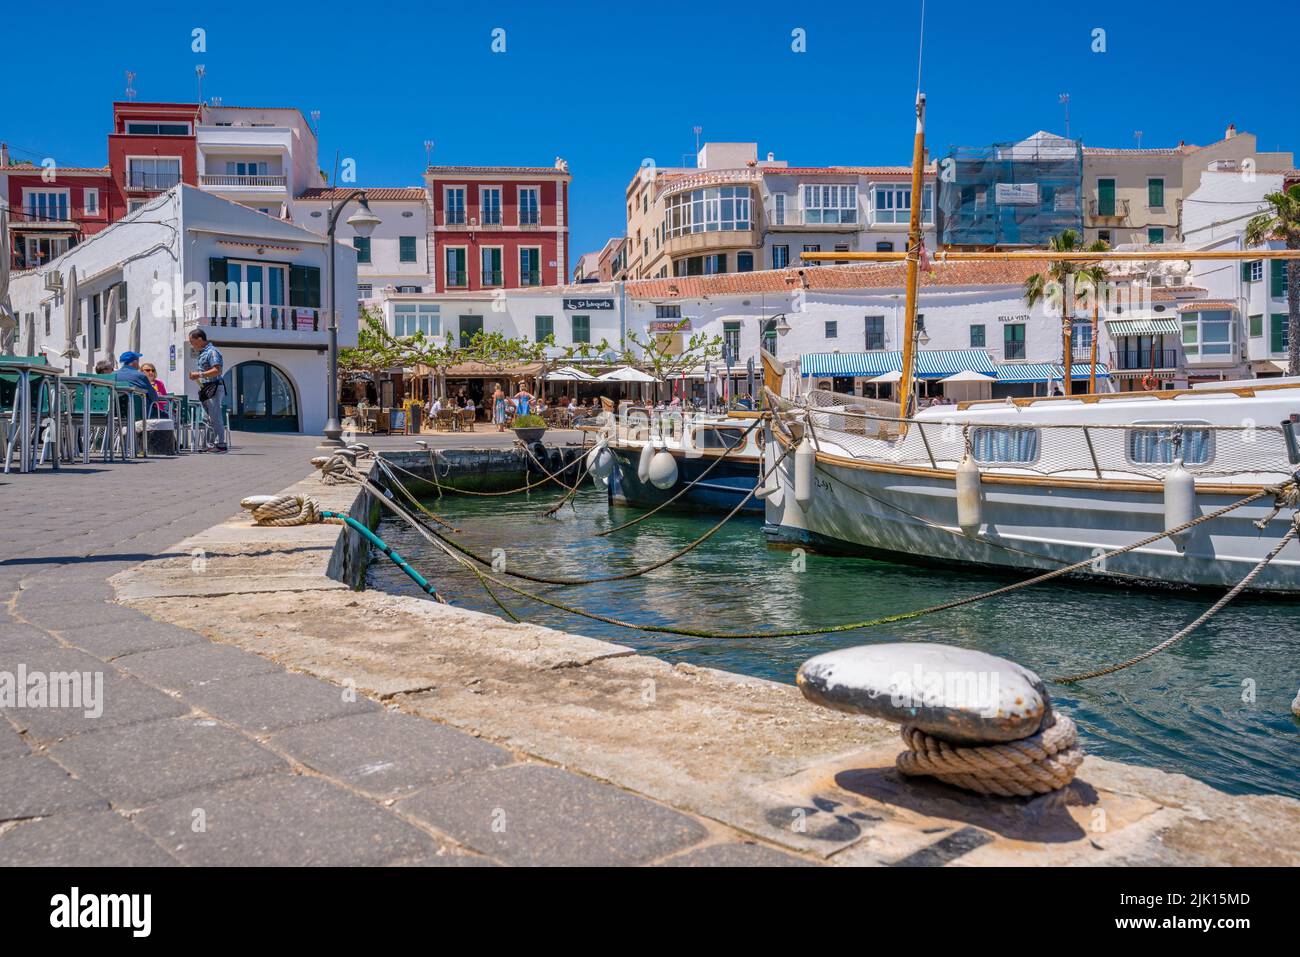 View of colourful cafes, restaurants and boats in harbour against blue sky, Cales Fonts, Menorca, Balearic Islands, Spain, Mediterranean, Europe Stock Photo